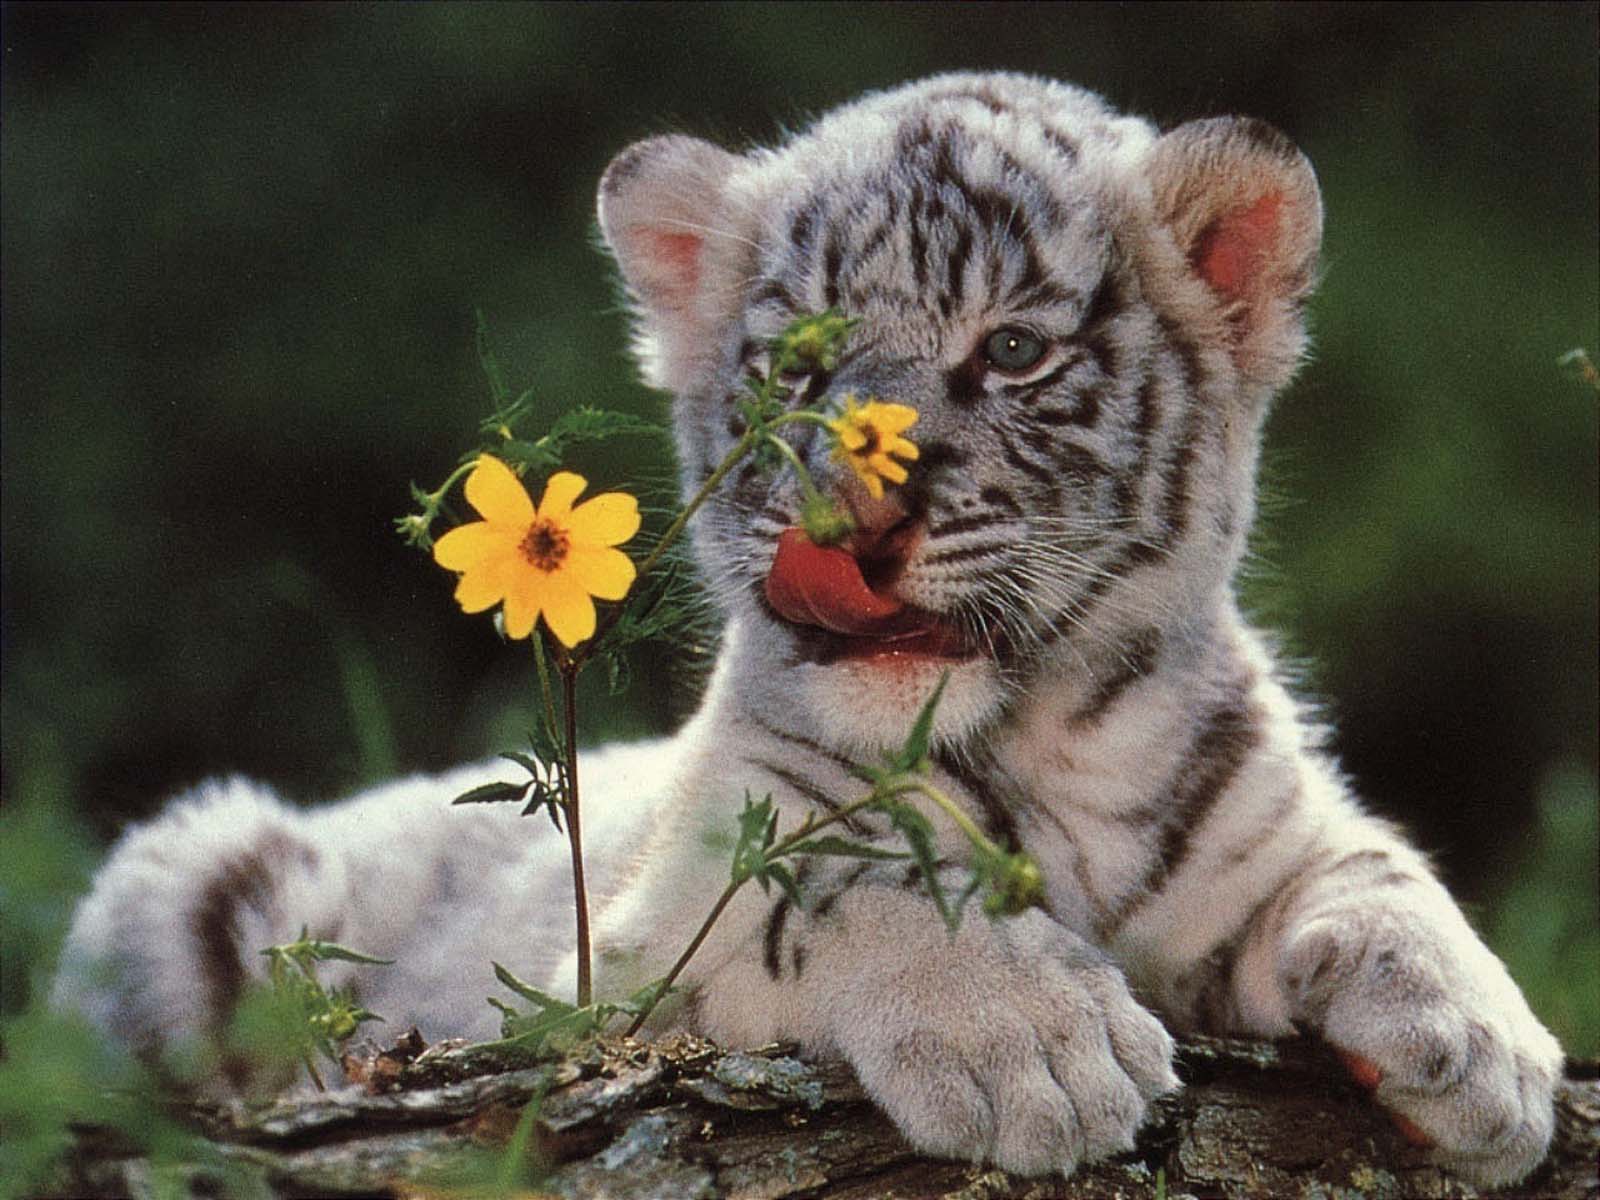 Baby White Tigers Wallpapers   2013 Wallpapers 1600x1200